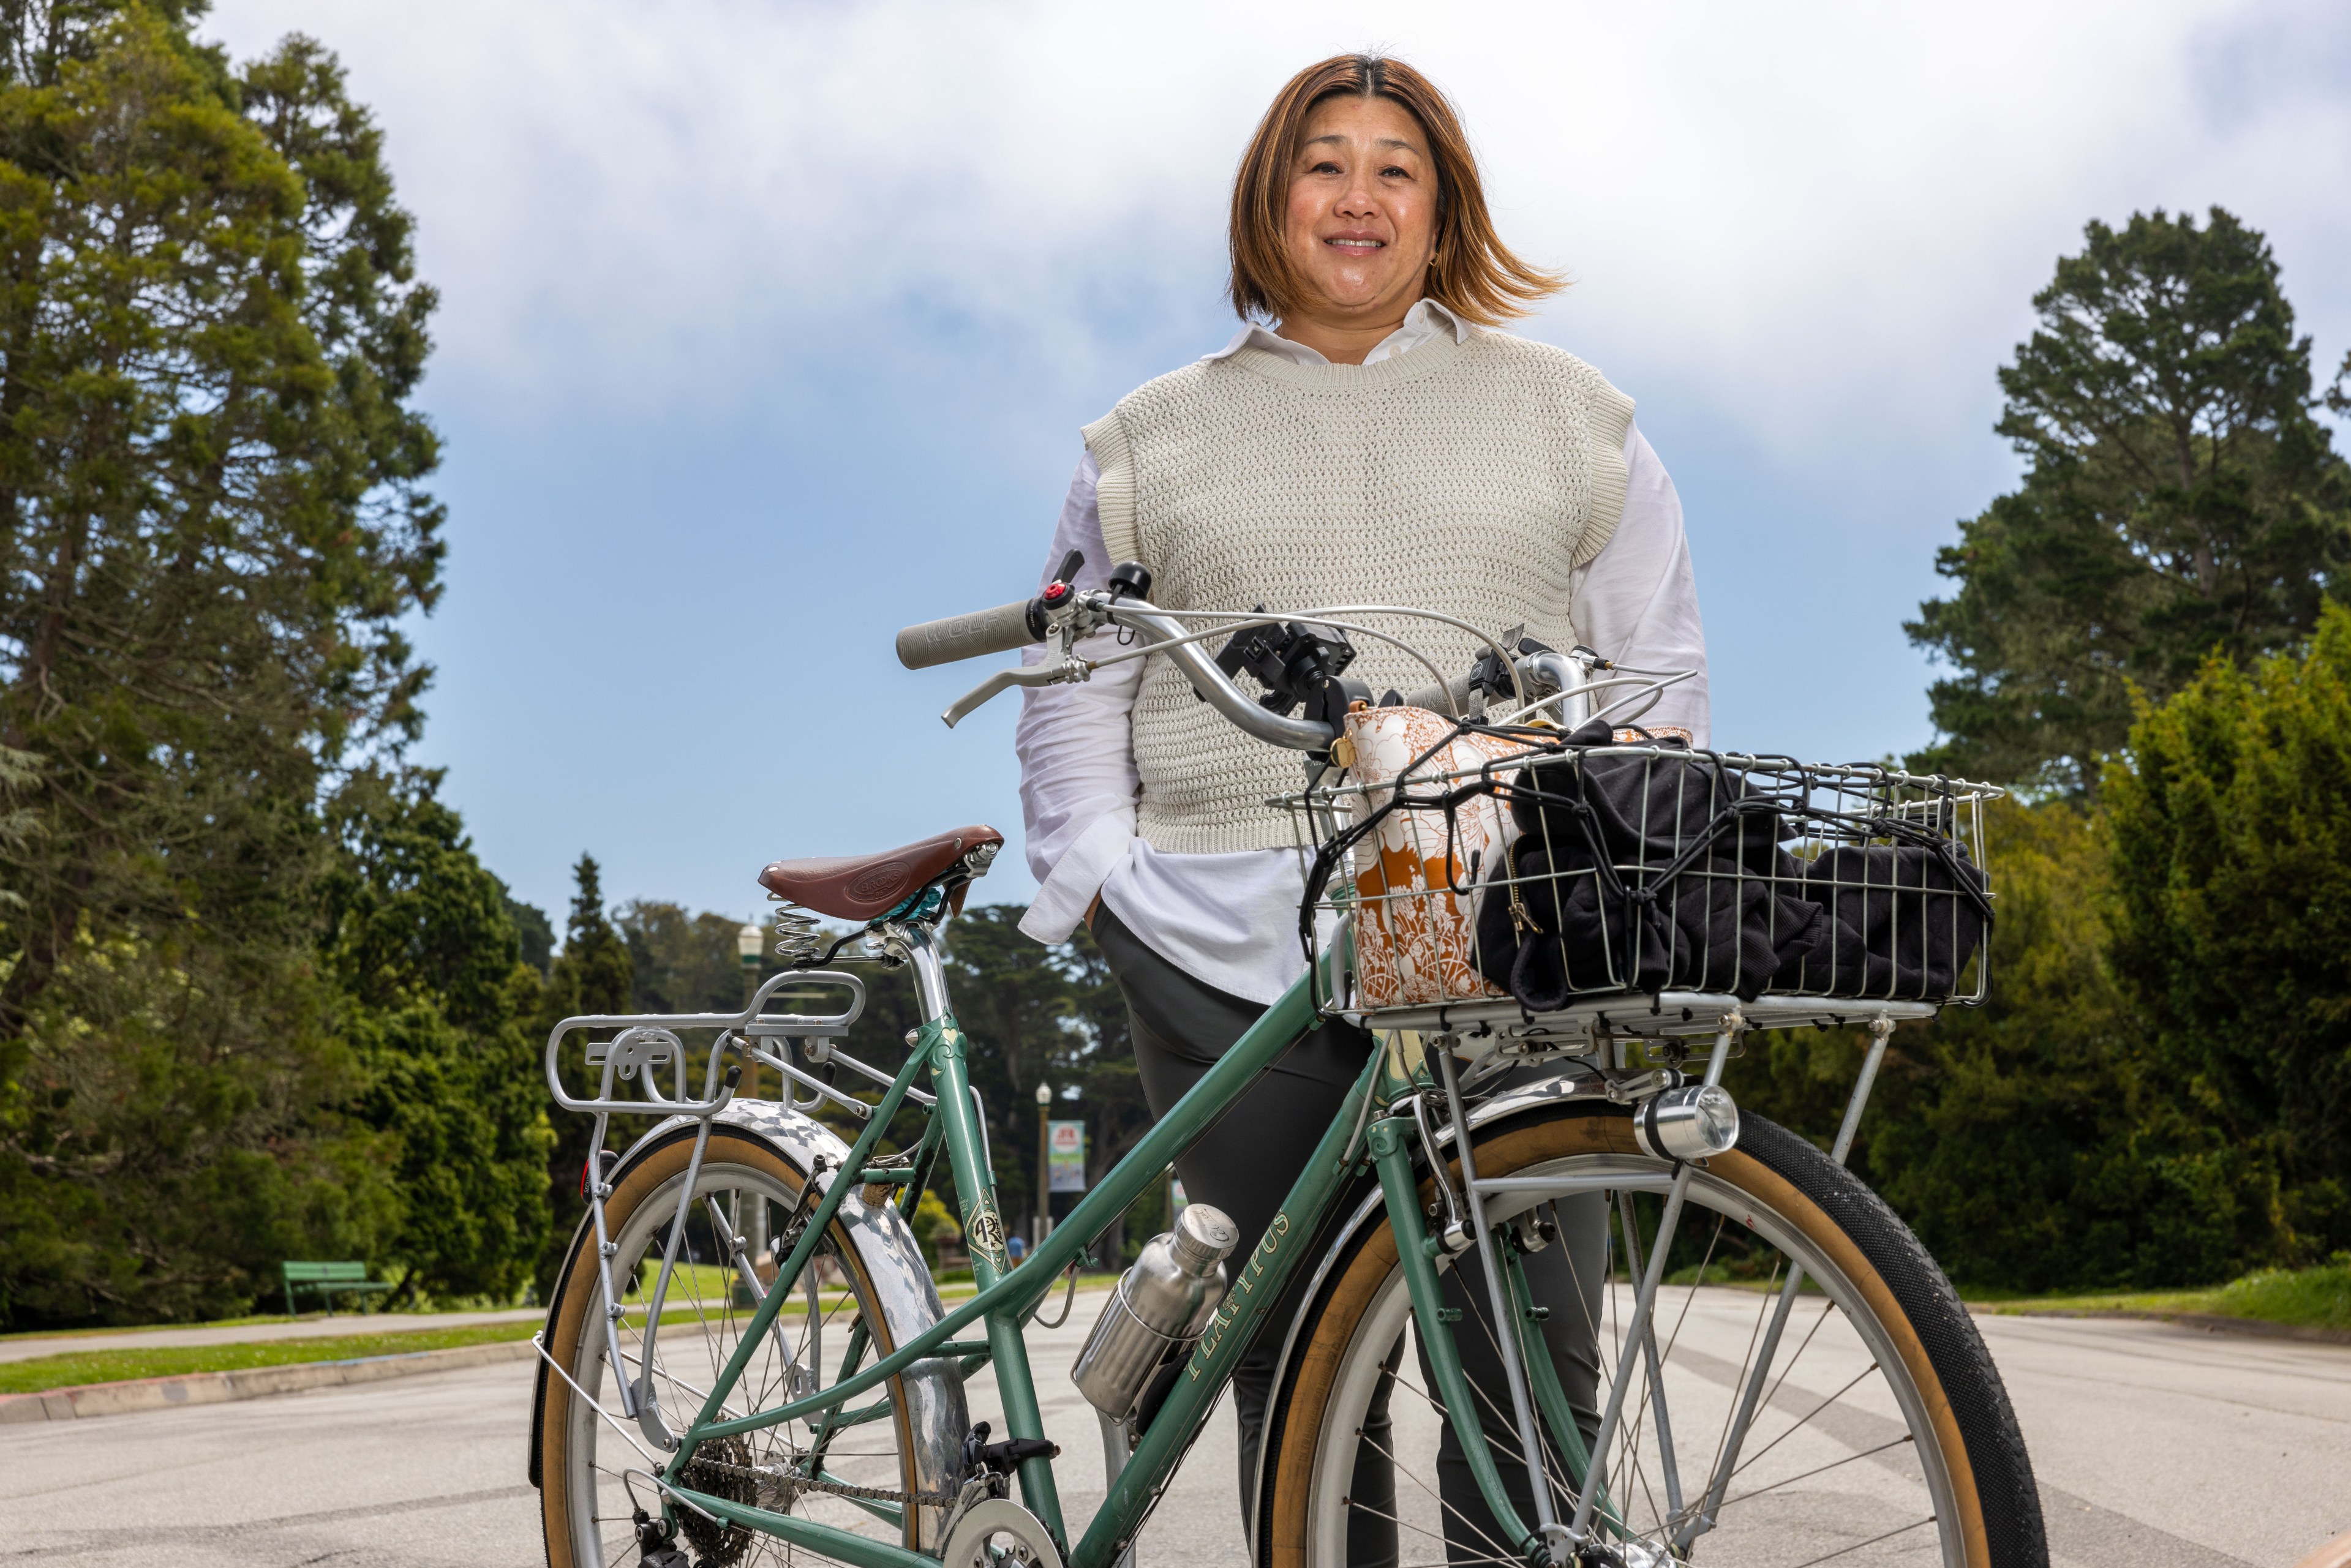 A person stands smiling beside a green bicycle with a loaded front basket on a tree-lined street, wearing a white shirt and light-colored sweater vest.